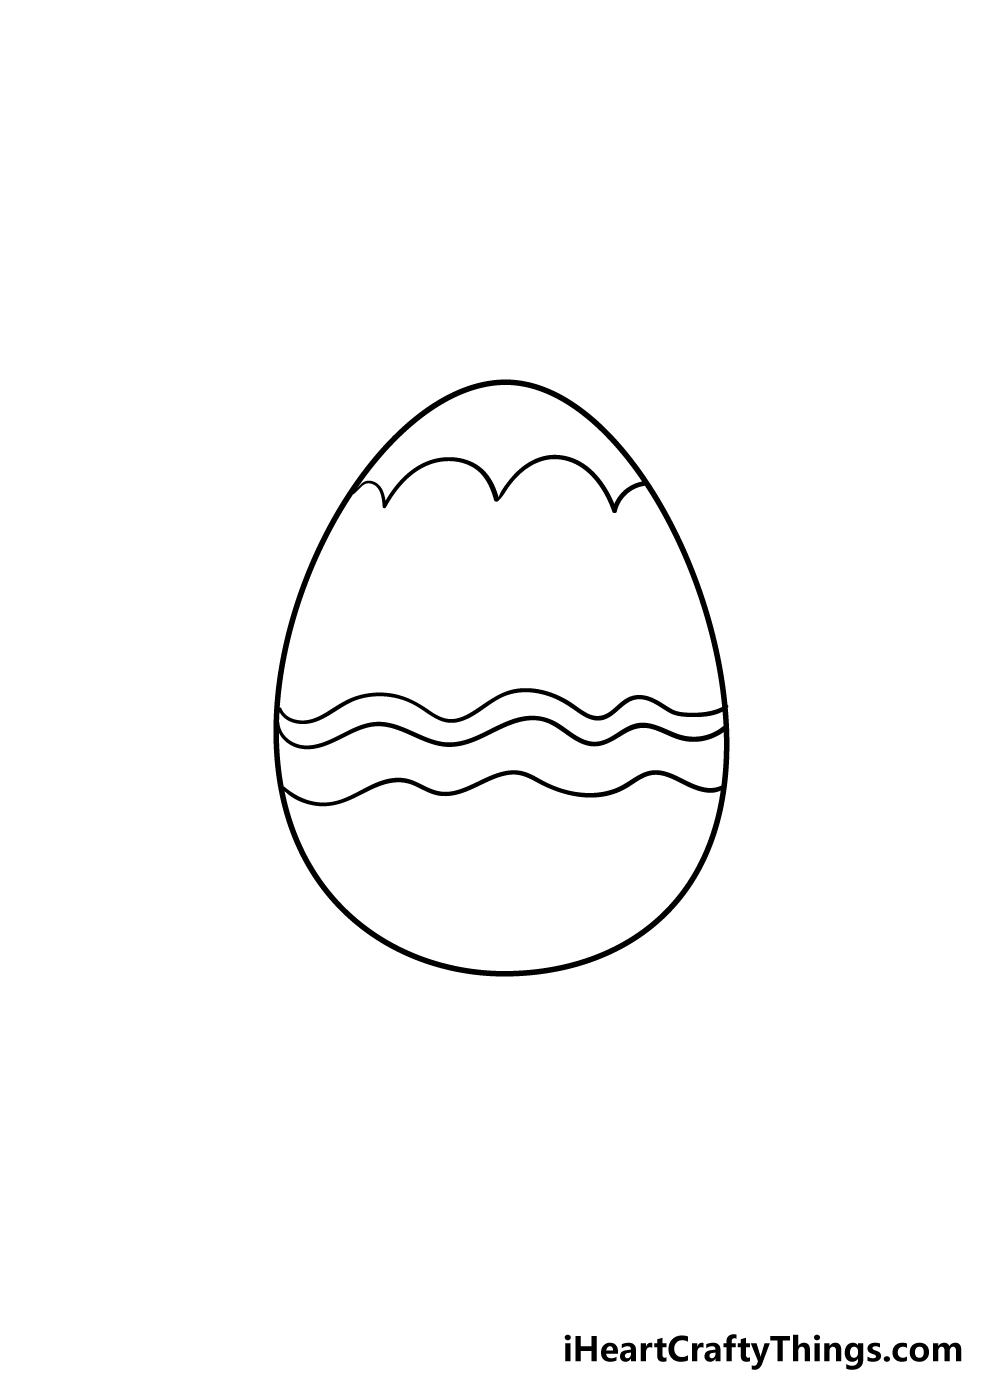 Easter egg drawing step 2